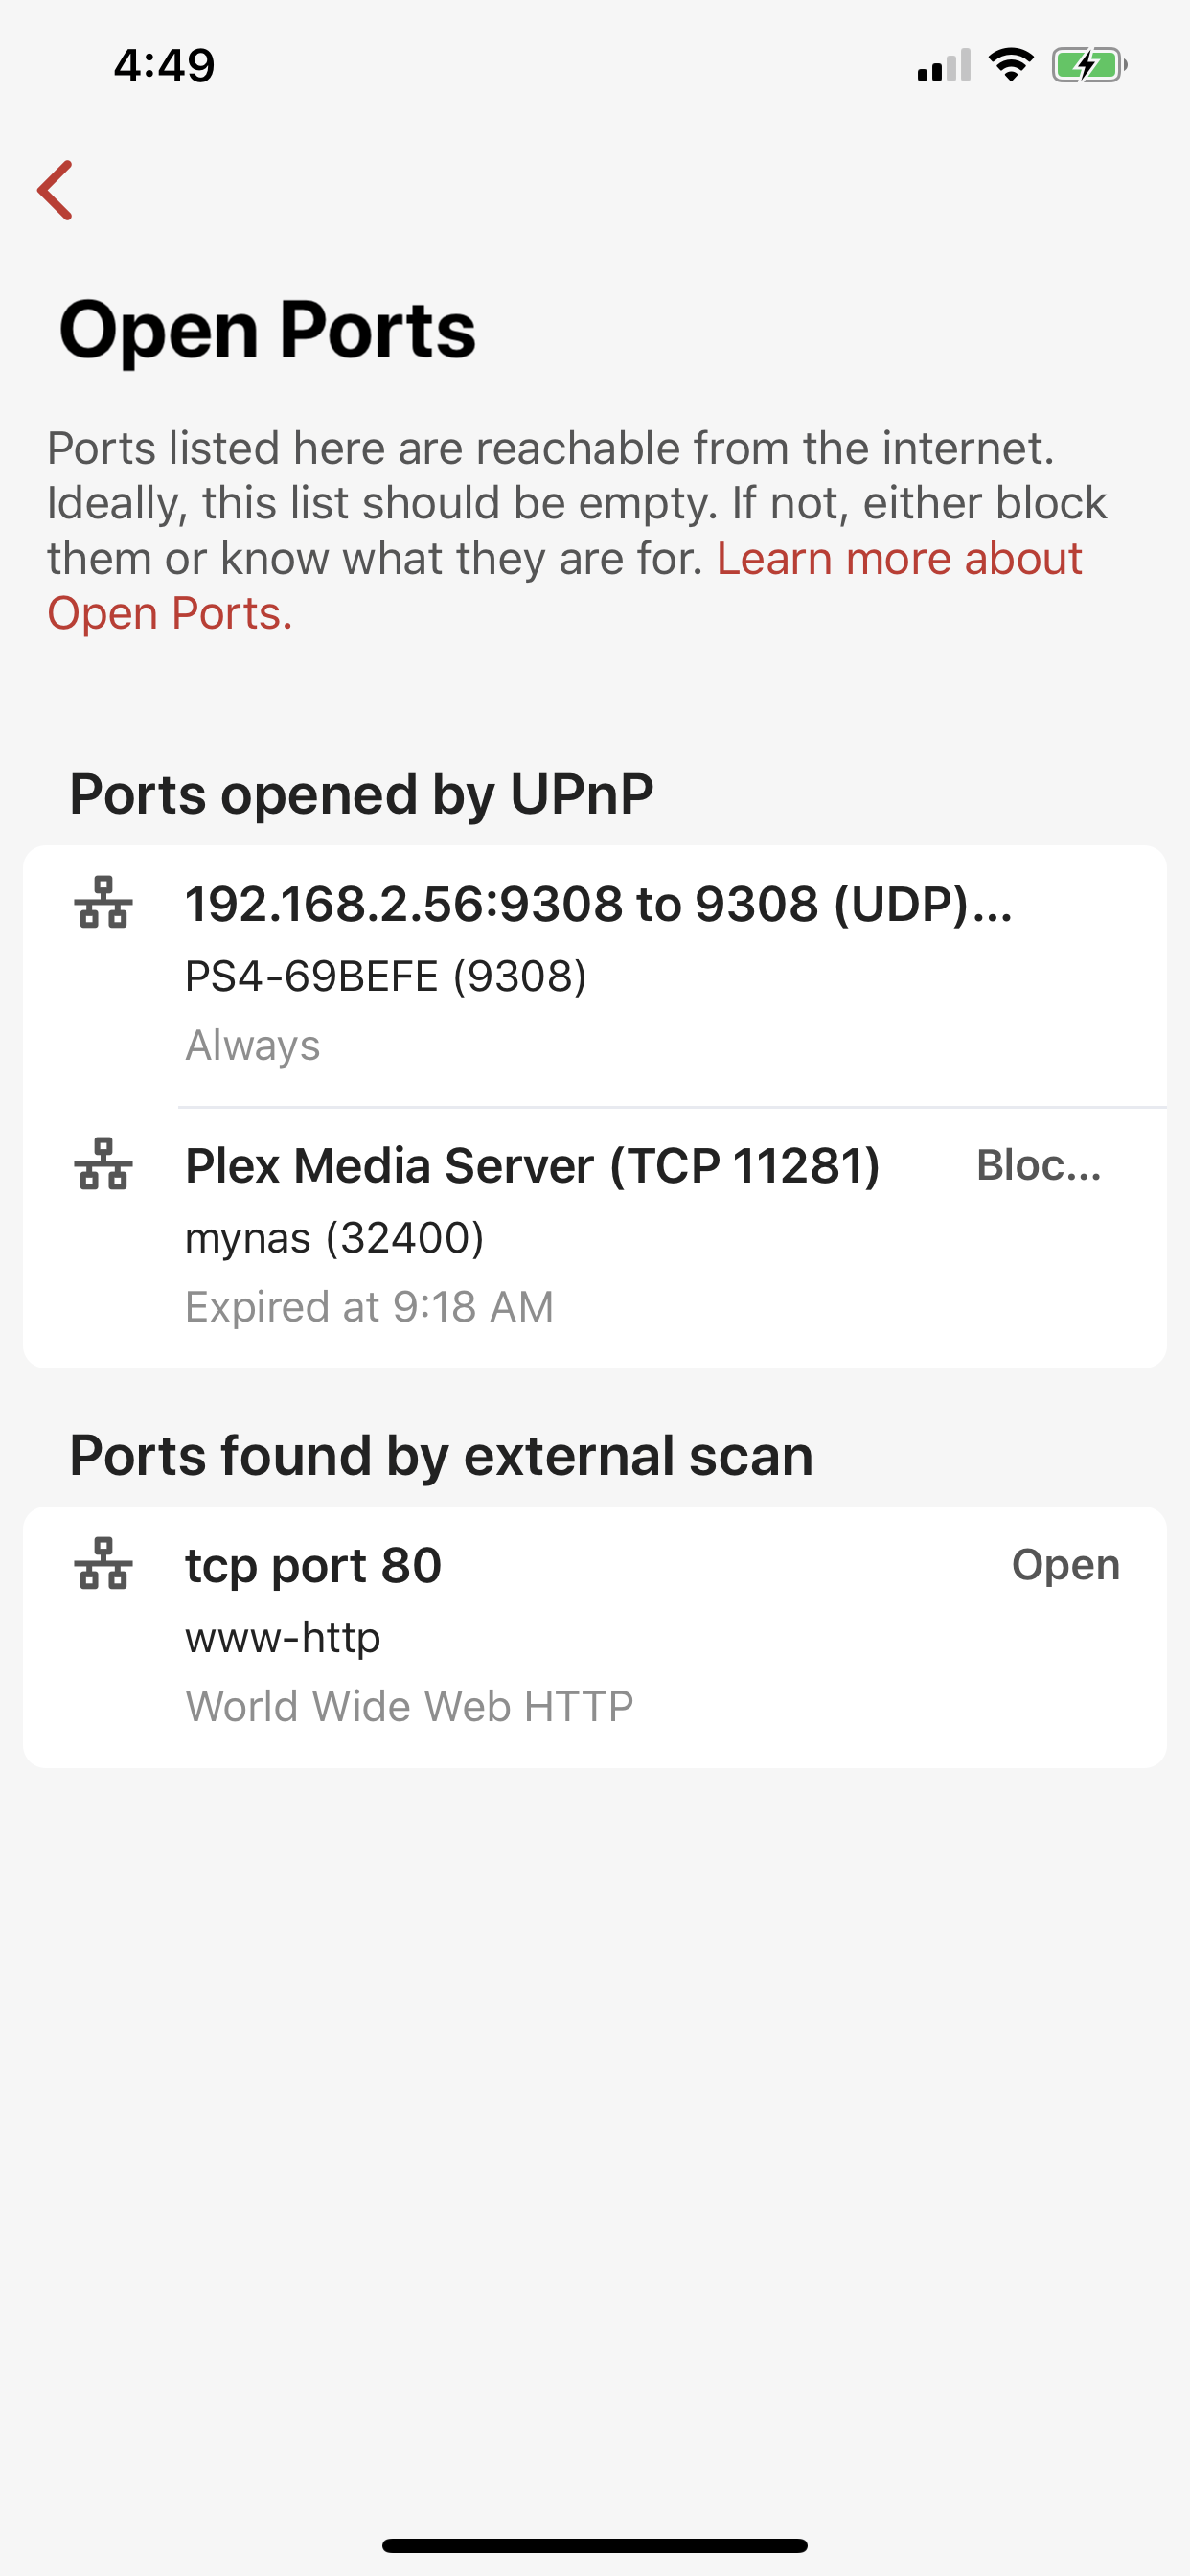 The Firewalla App example highlighting opened and blocked ports 